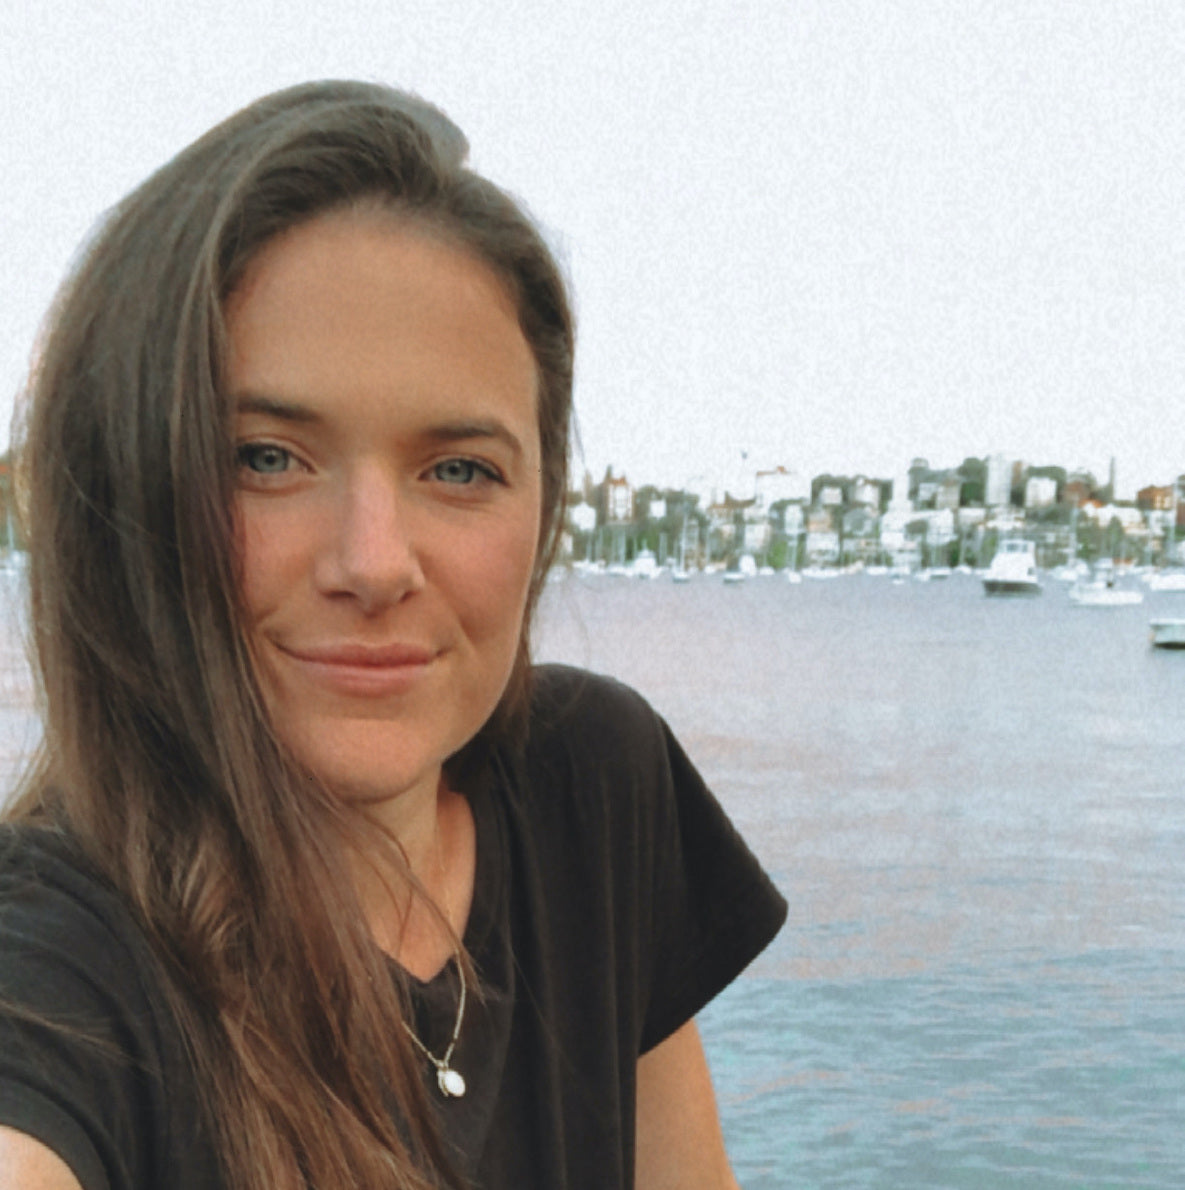 Alt text: A selfie of Sarah wearing a black tee with the ocean, boats and shoreline in the background over her left shoulder.